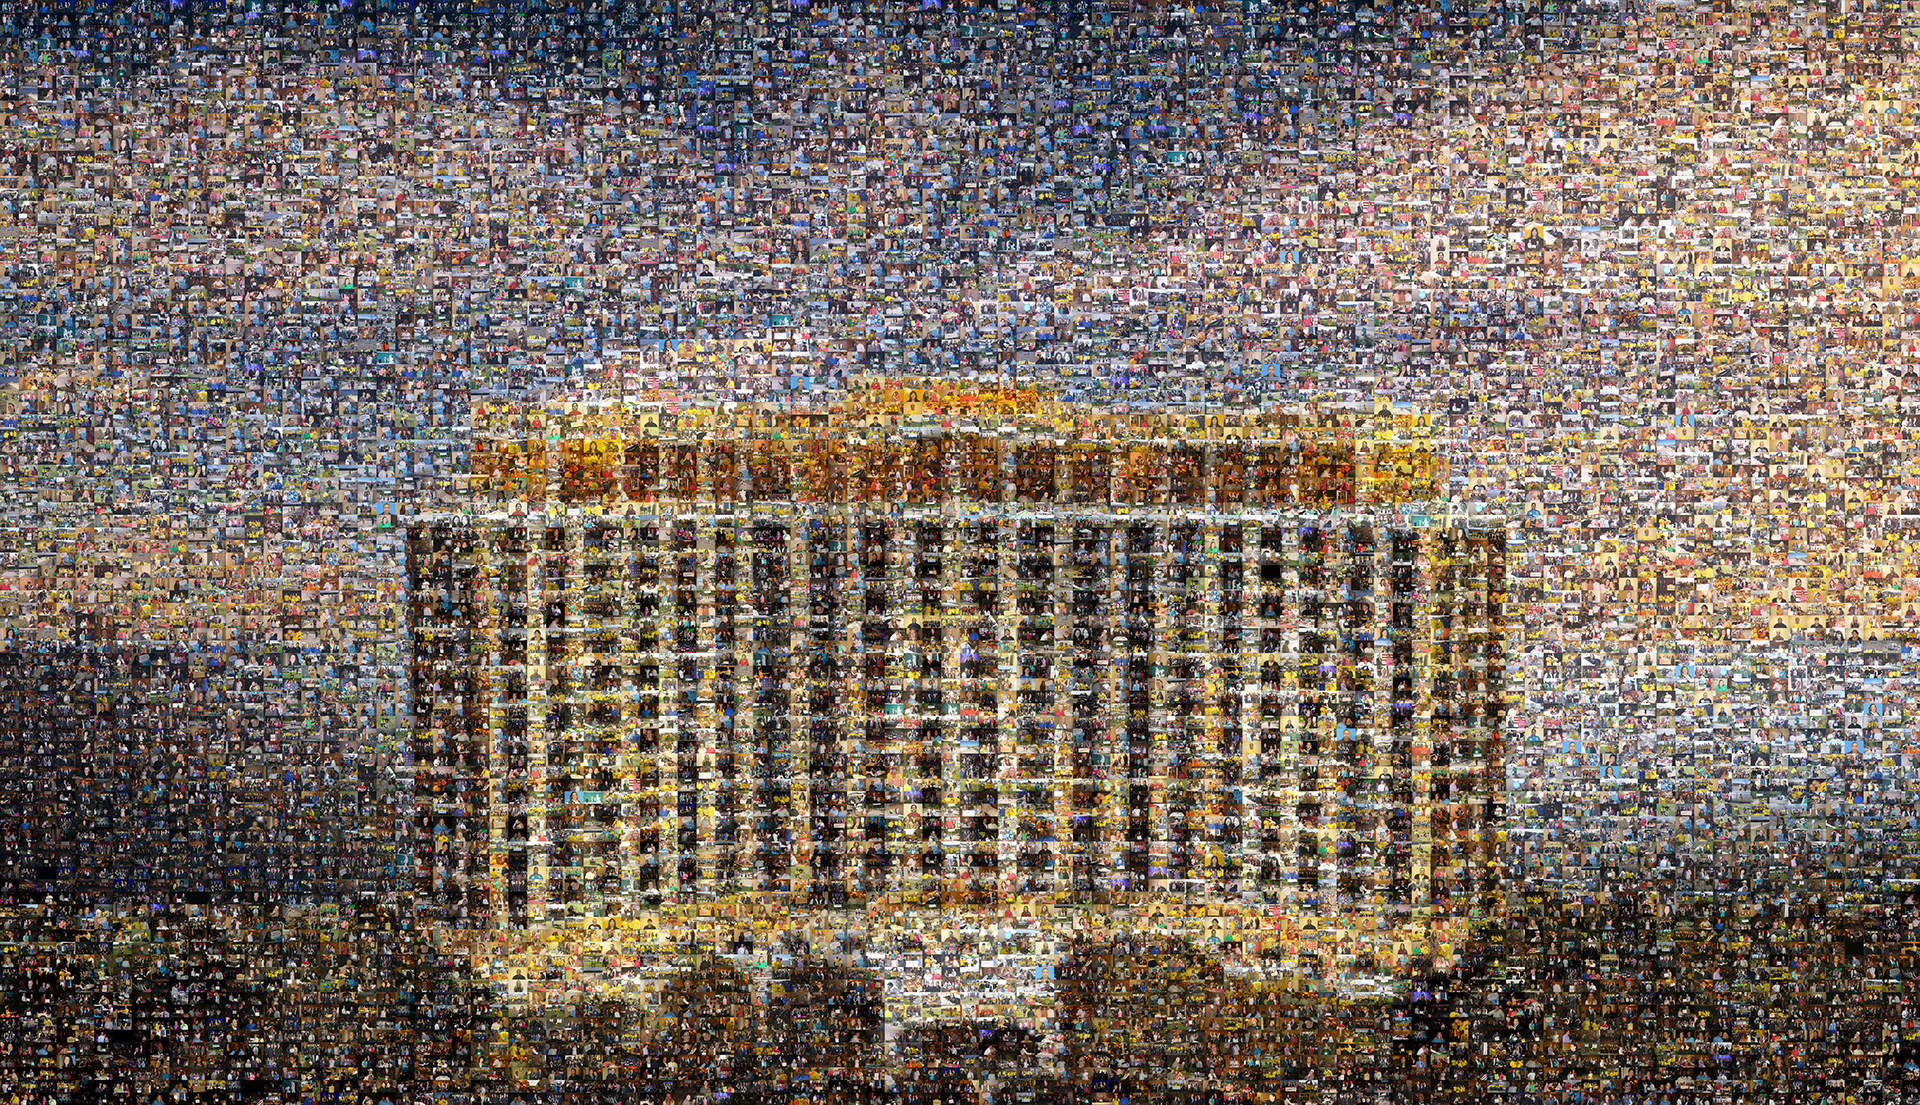 photo mosaic 1300 cells were used to create this stunning mural of the Beau Rivage Resort & Casino